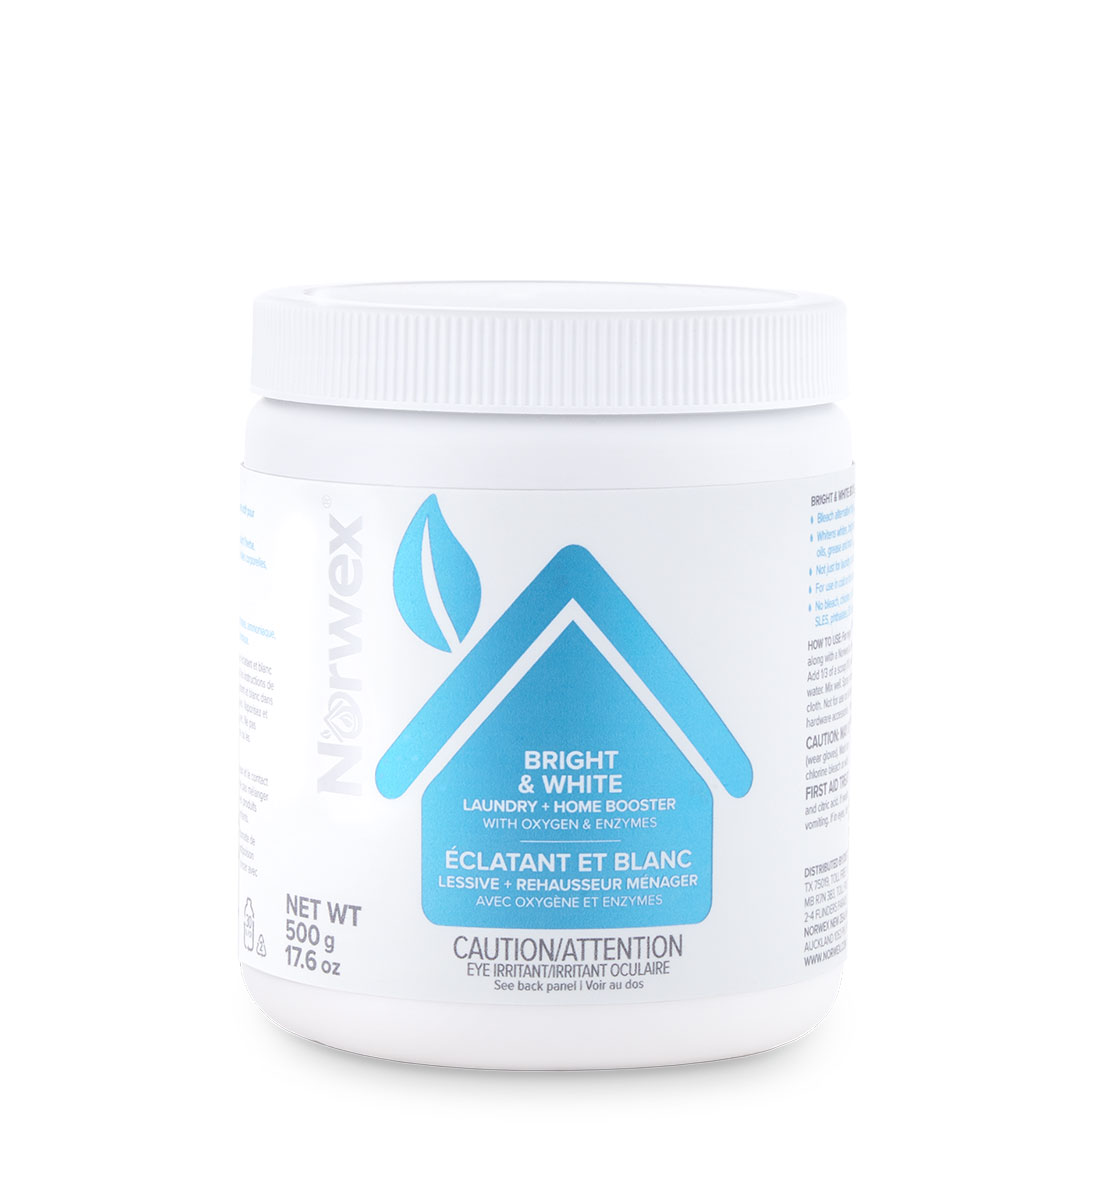 Bright & White Laundry + Home Booster 500g